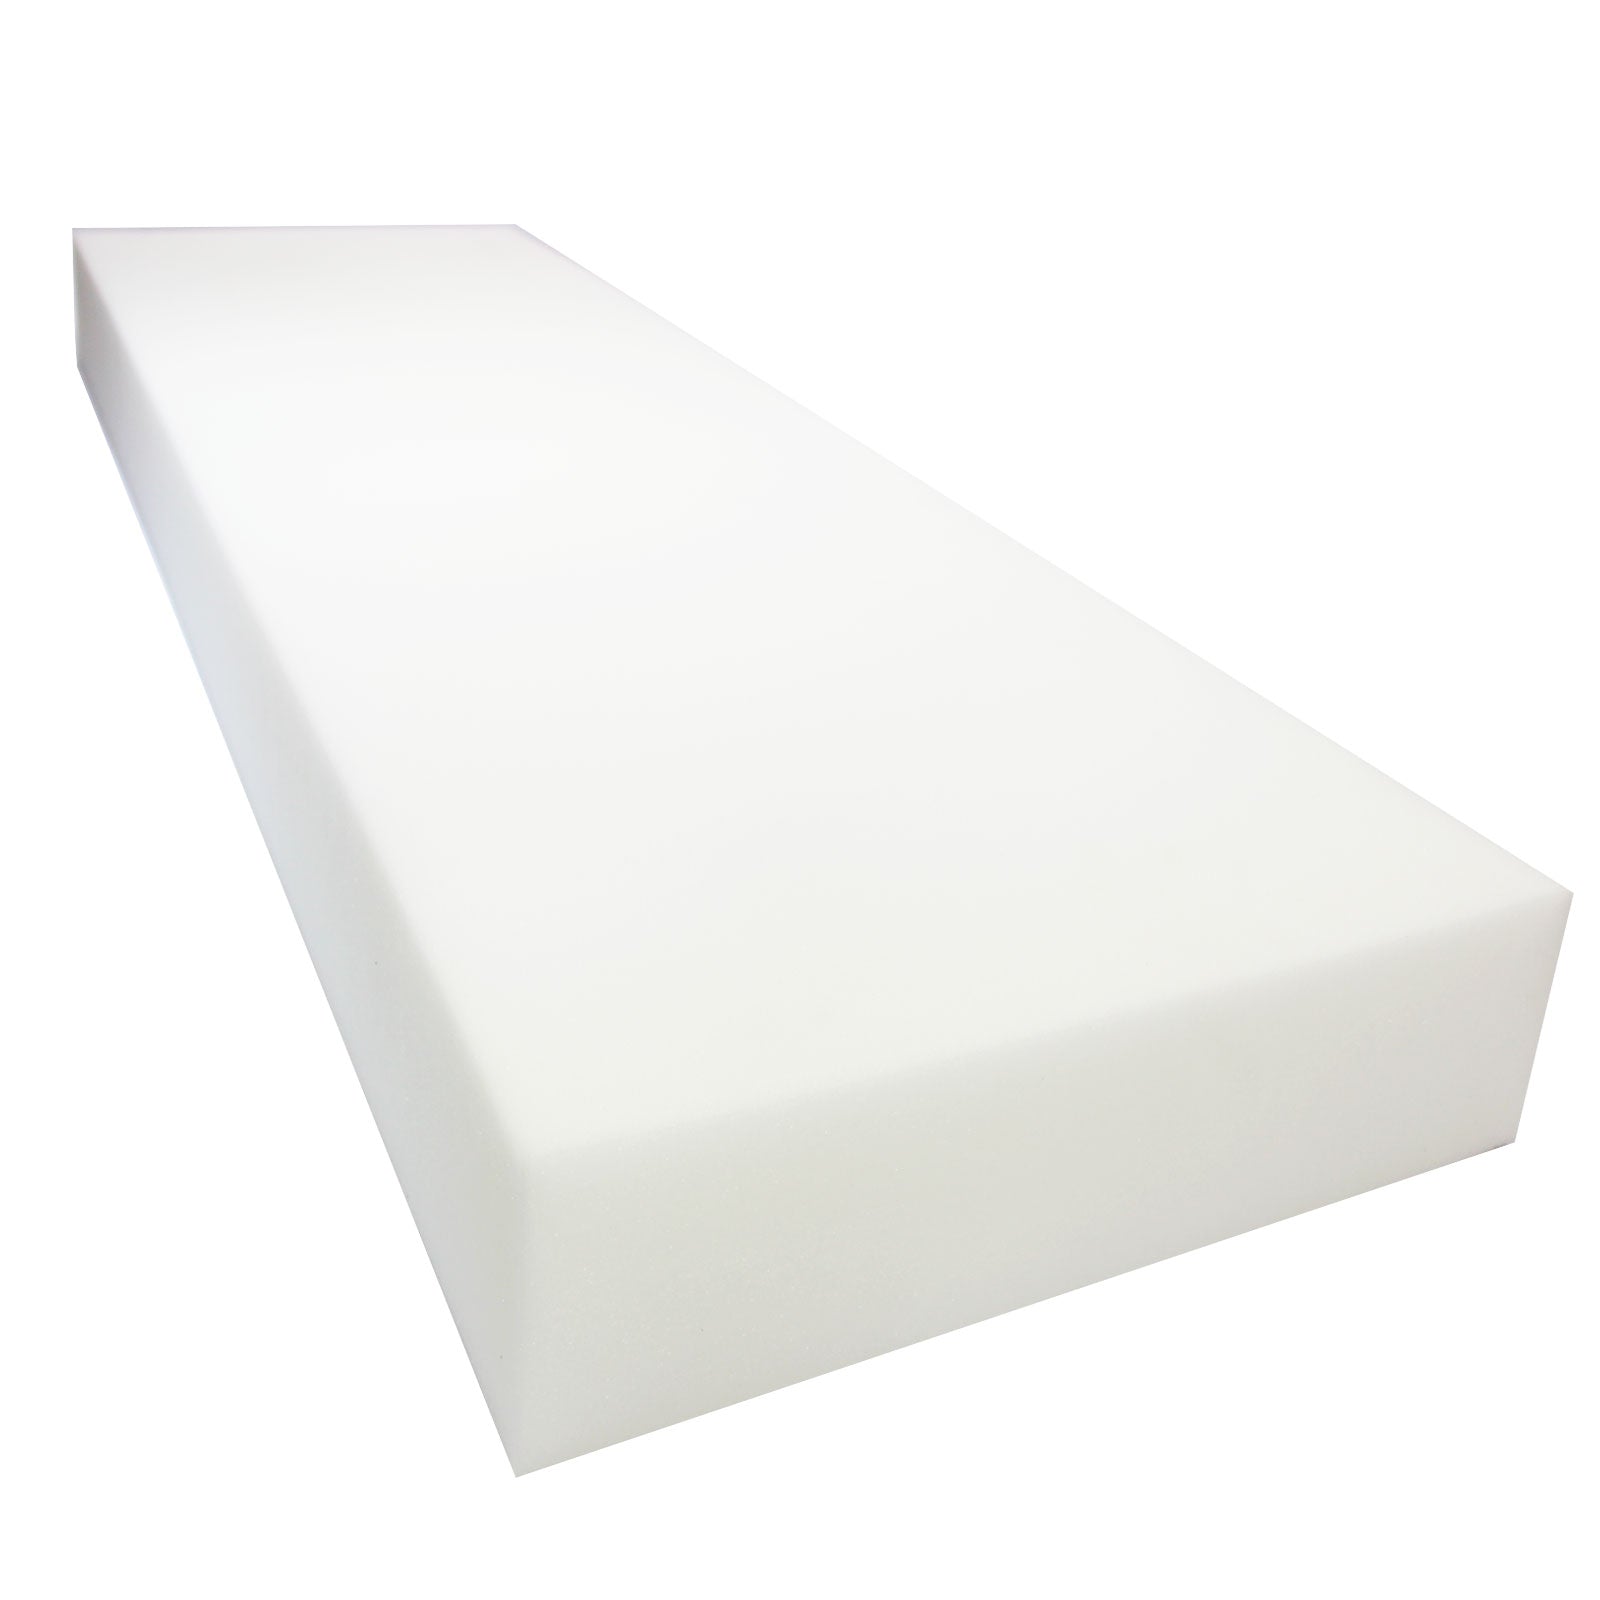 60x20 High dens Upholstery Foam Sheet Select Thickness ¼ ½ 1 2 3 4  5 6